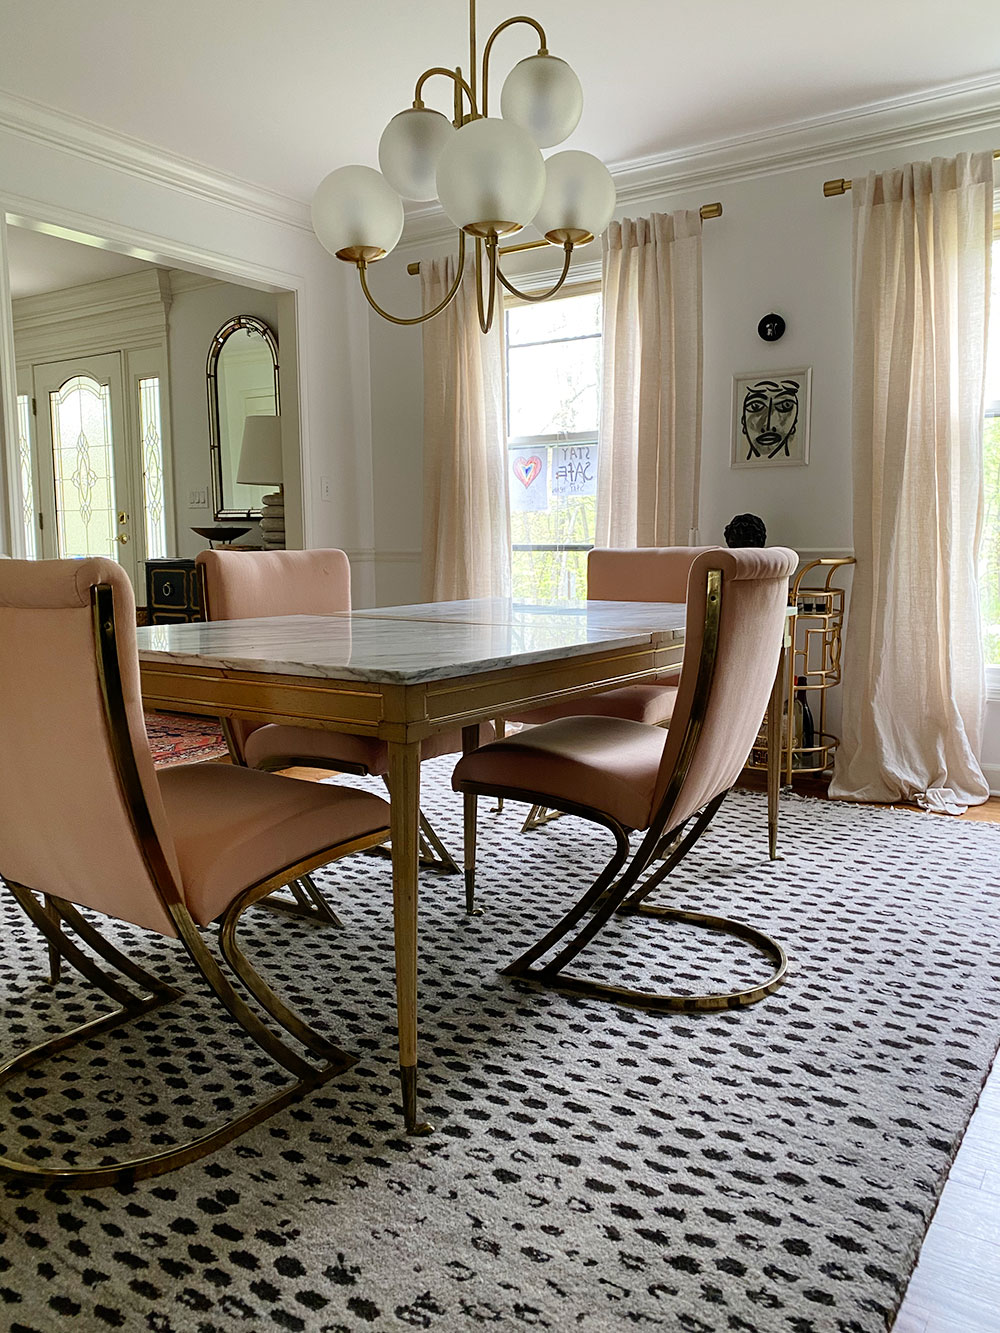 Original pink and brass cantilever chairs by Pierre Cardin